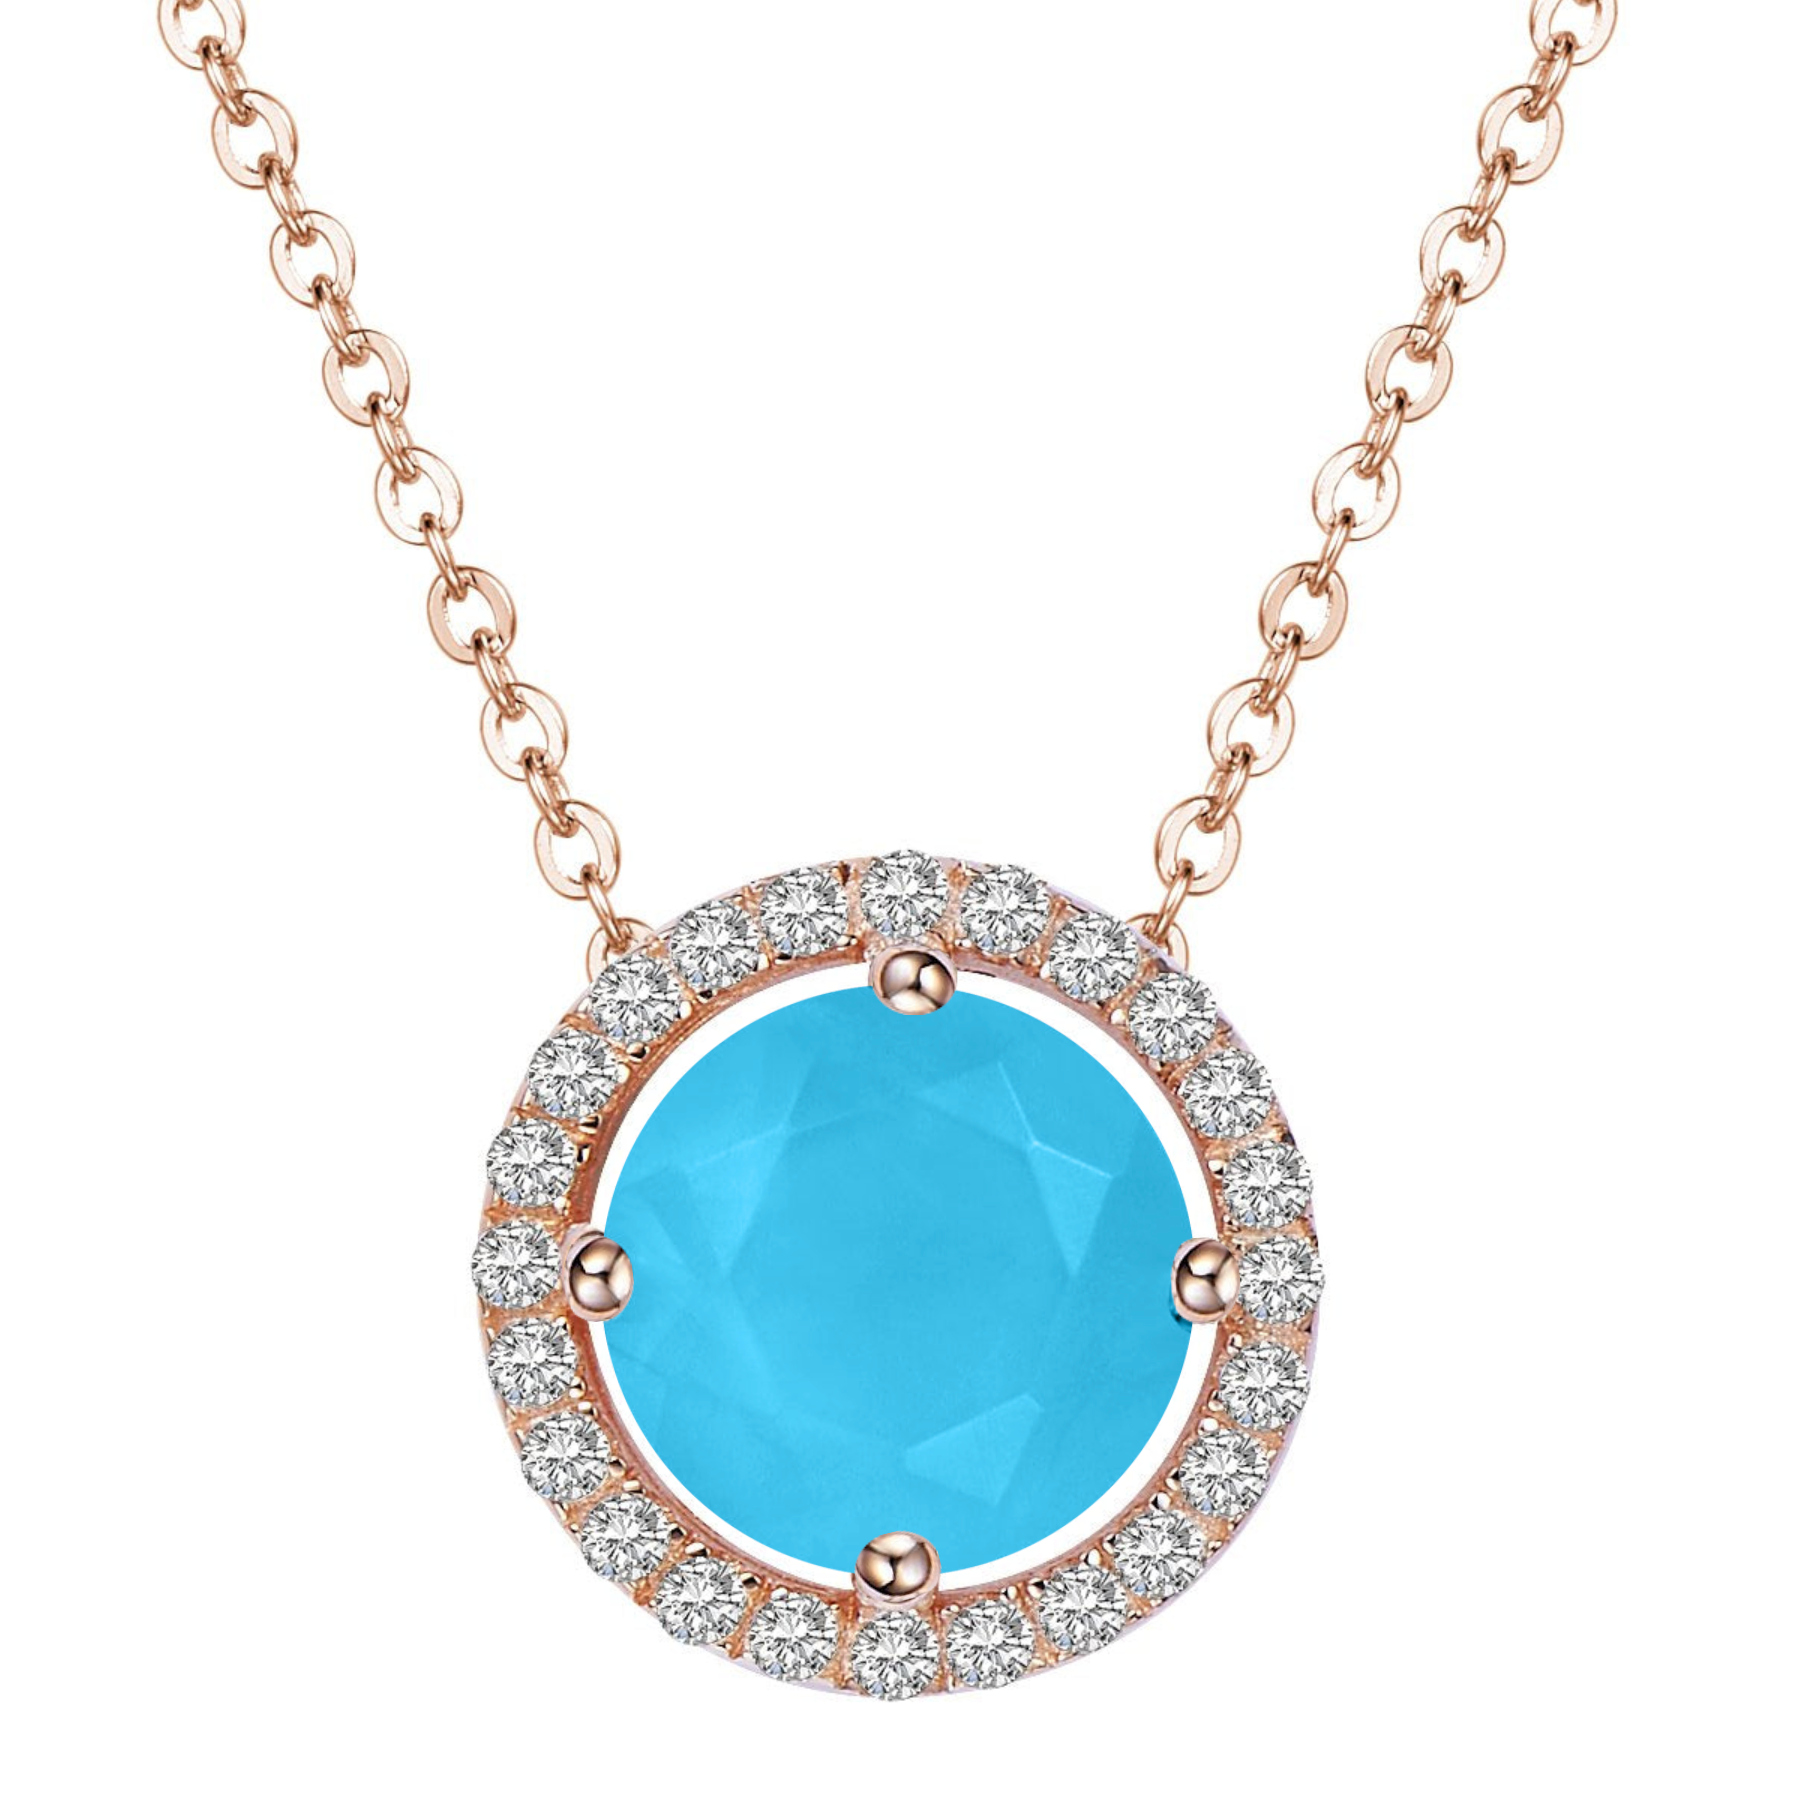 Royal Turquoise Rose gold necklace